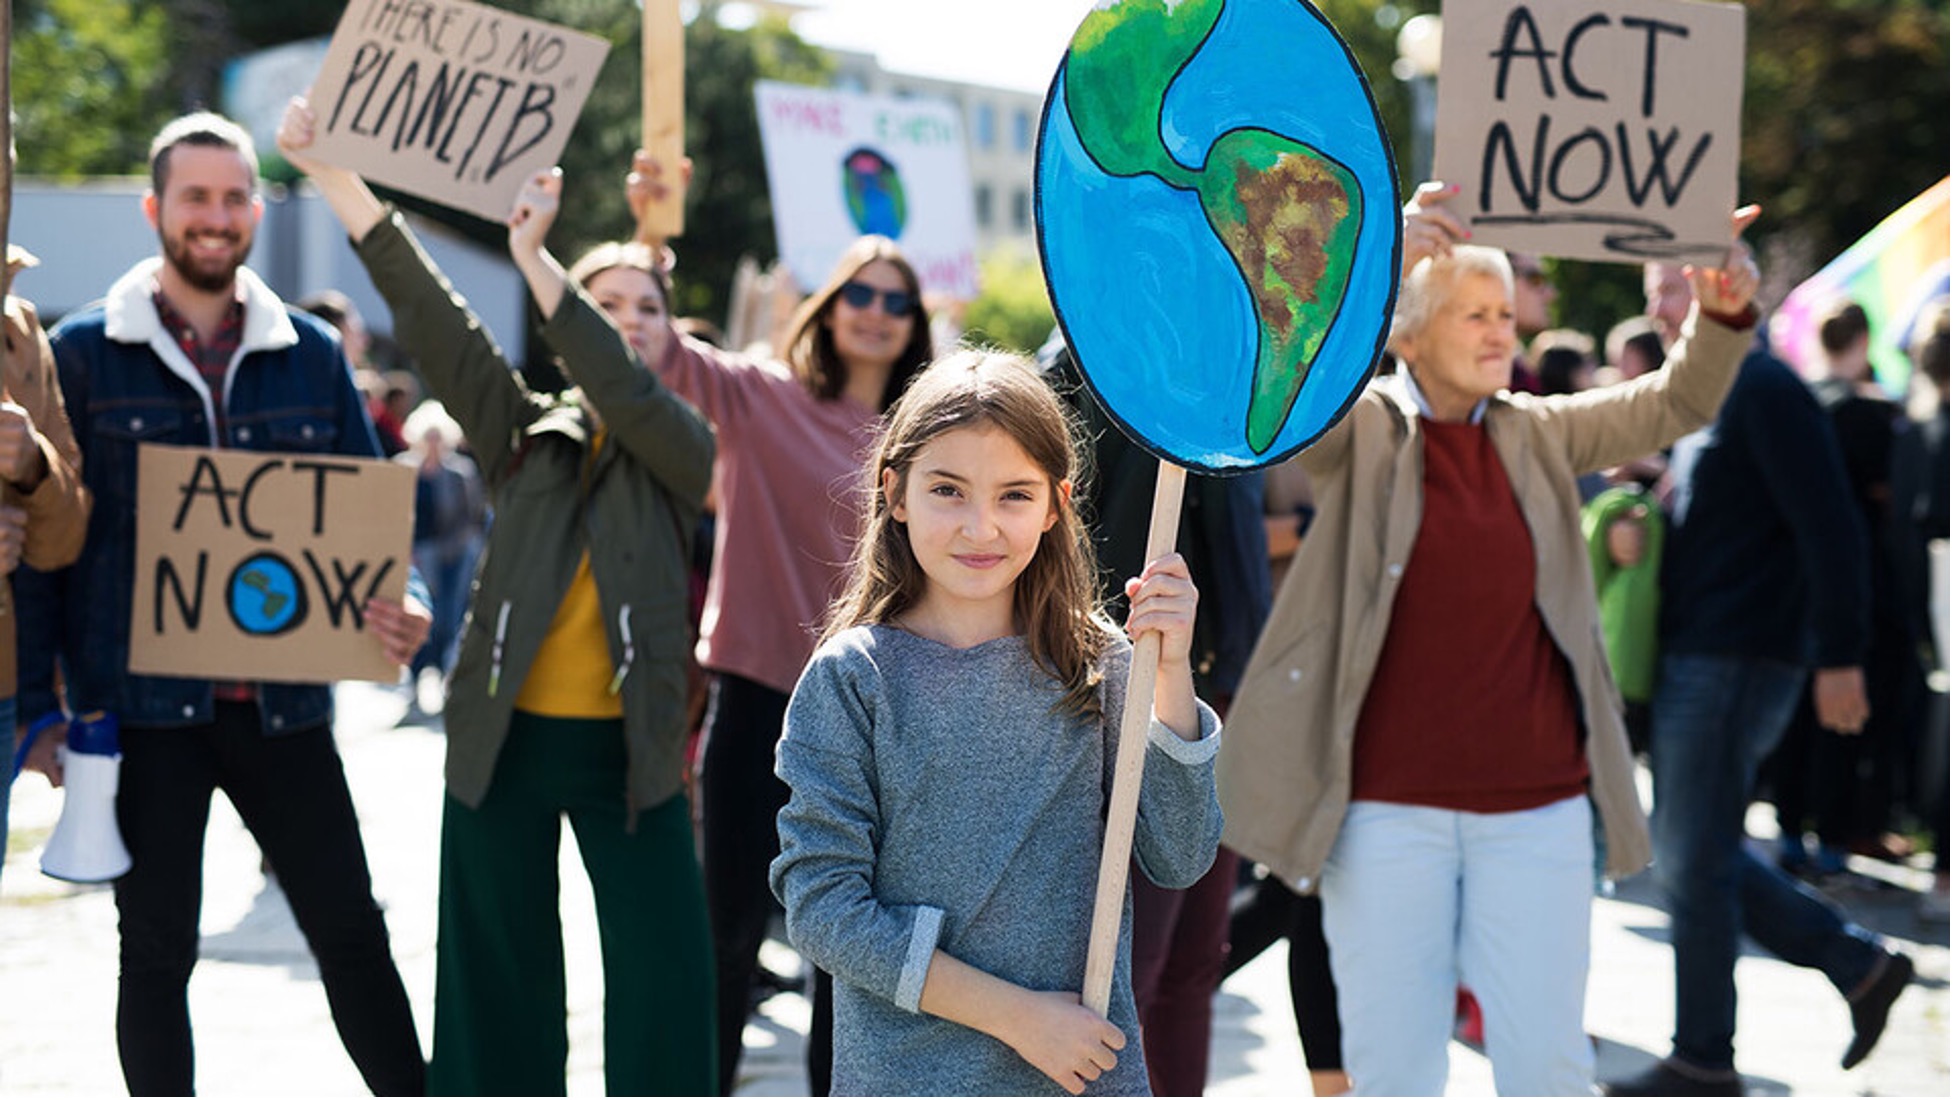 A photo of crowd at climate change rally.